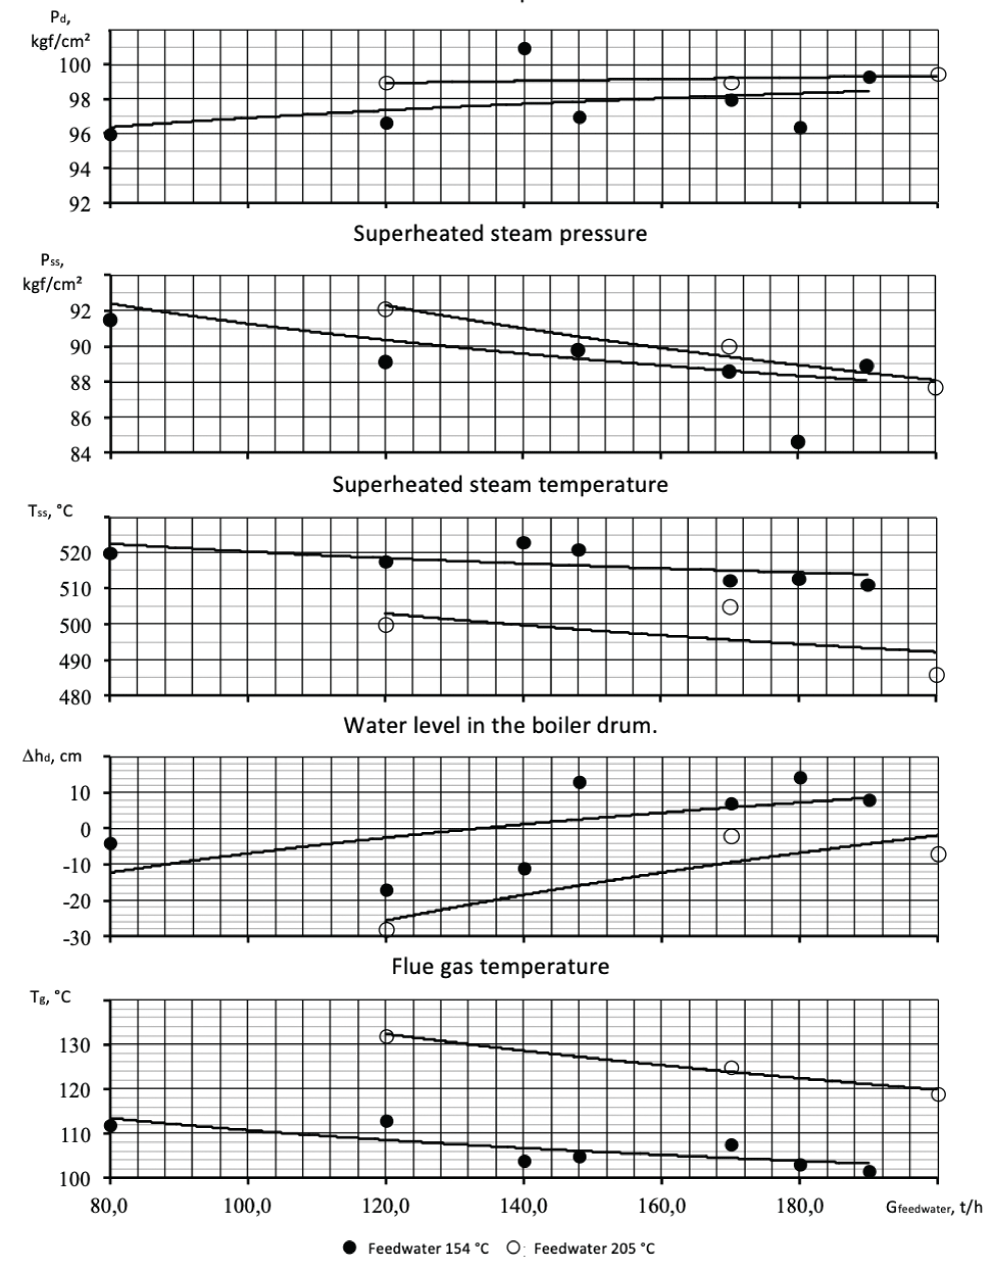 Main parameters of the boiler and circulation velocities with changes in boiler load Boiler drum pressure.